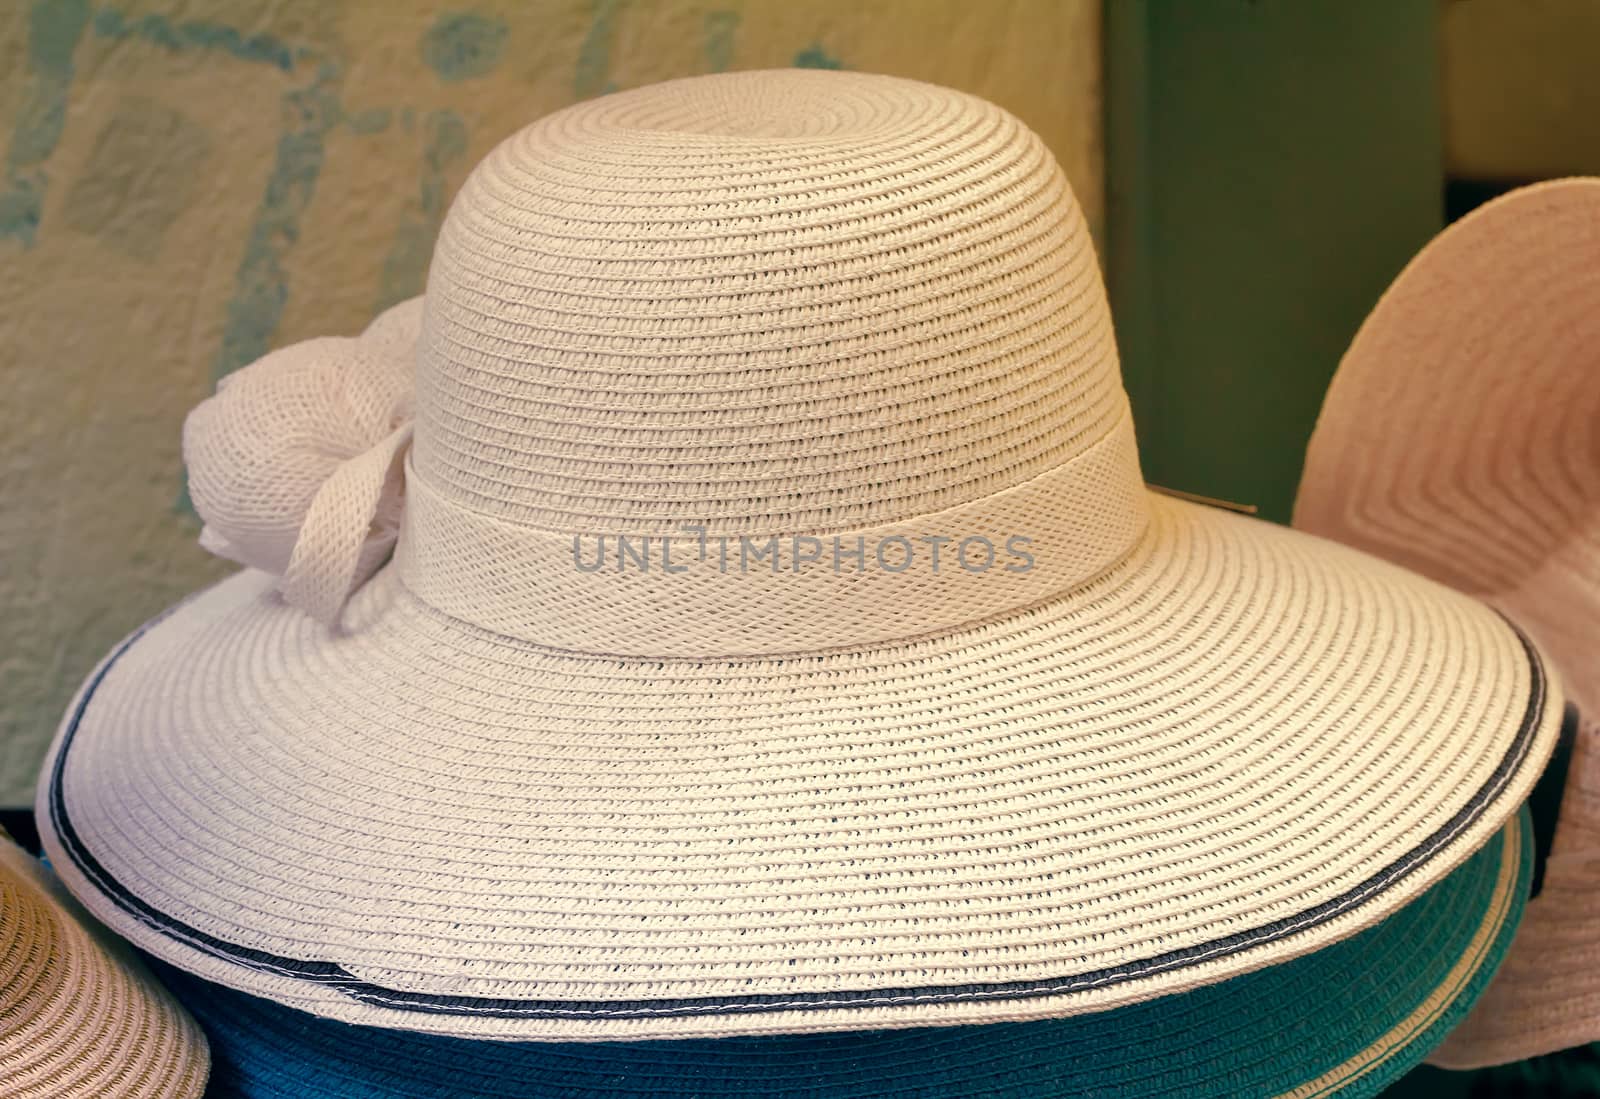 Women's summer hat for sun protection. by georgina198